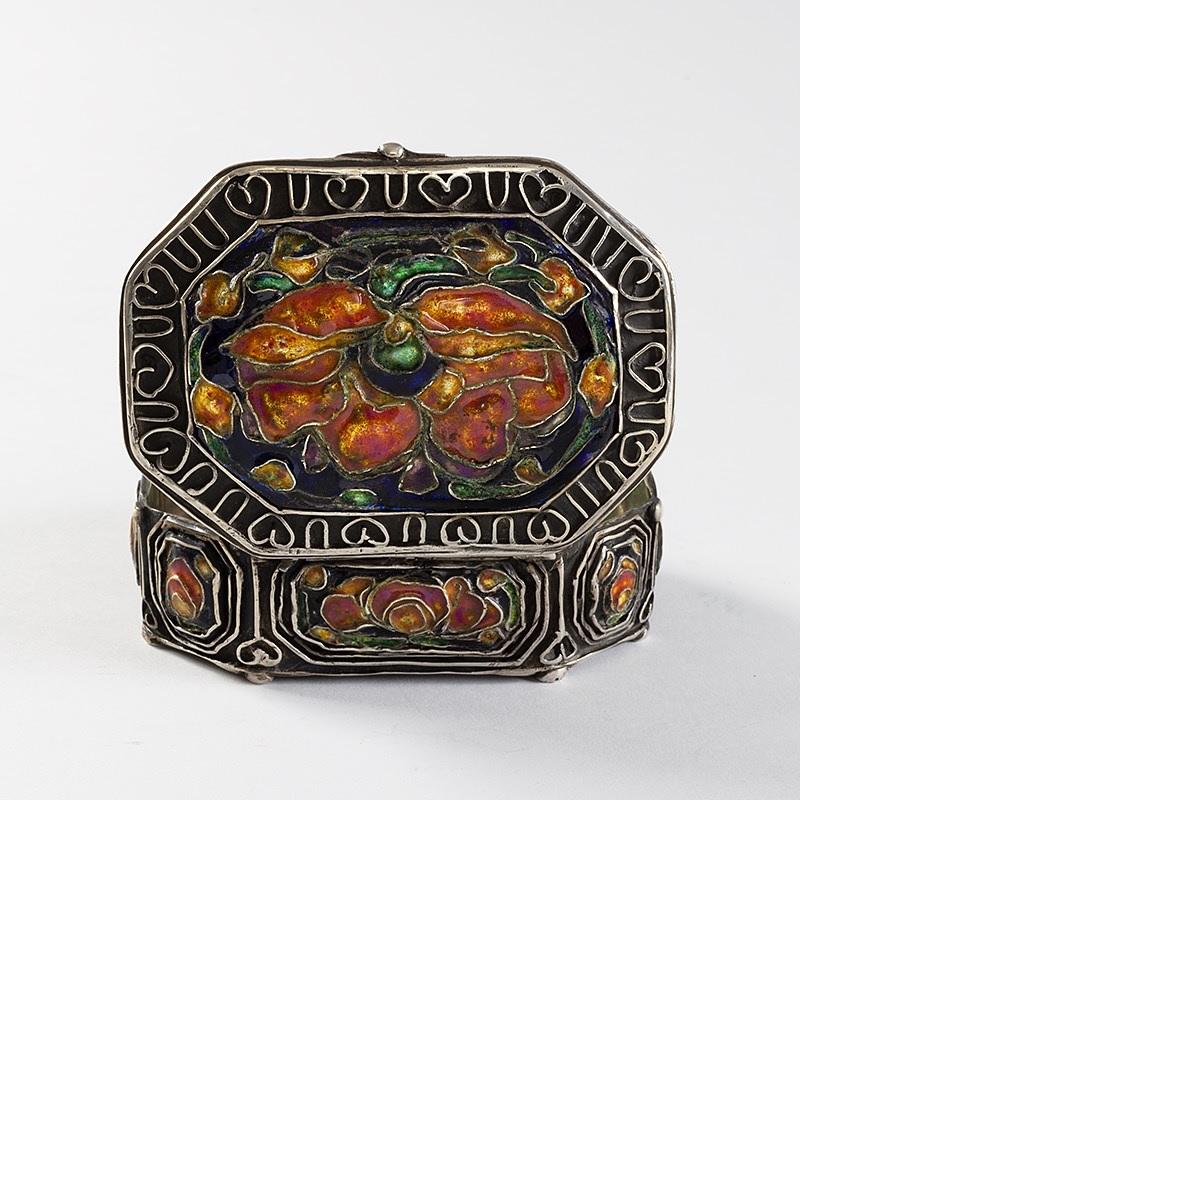 This delicately-scaled silver box, by master enamelist and metalsmith Elizabeth Copeland, is an Arts & Crafts collectible treasure. Consisting of refined Celtic-esque motifs in raised metalwork framing vignettes of soft, intricately-layered enamel